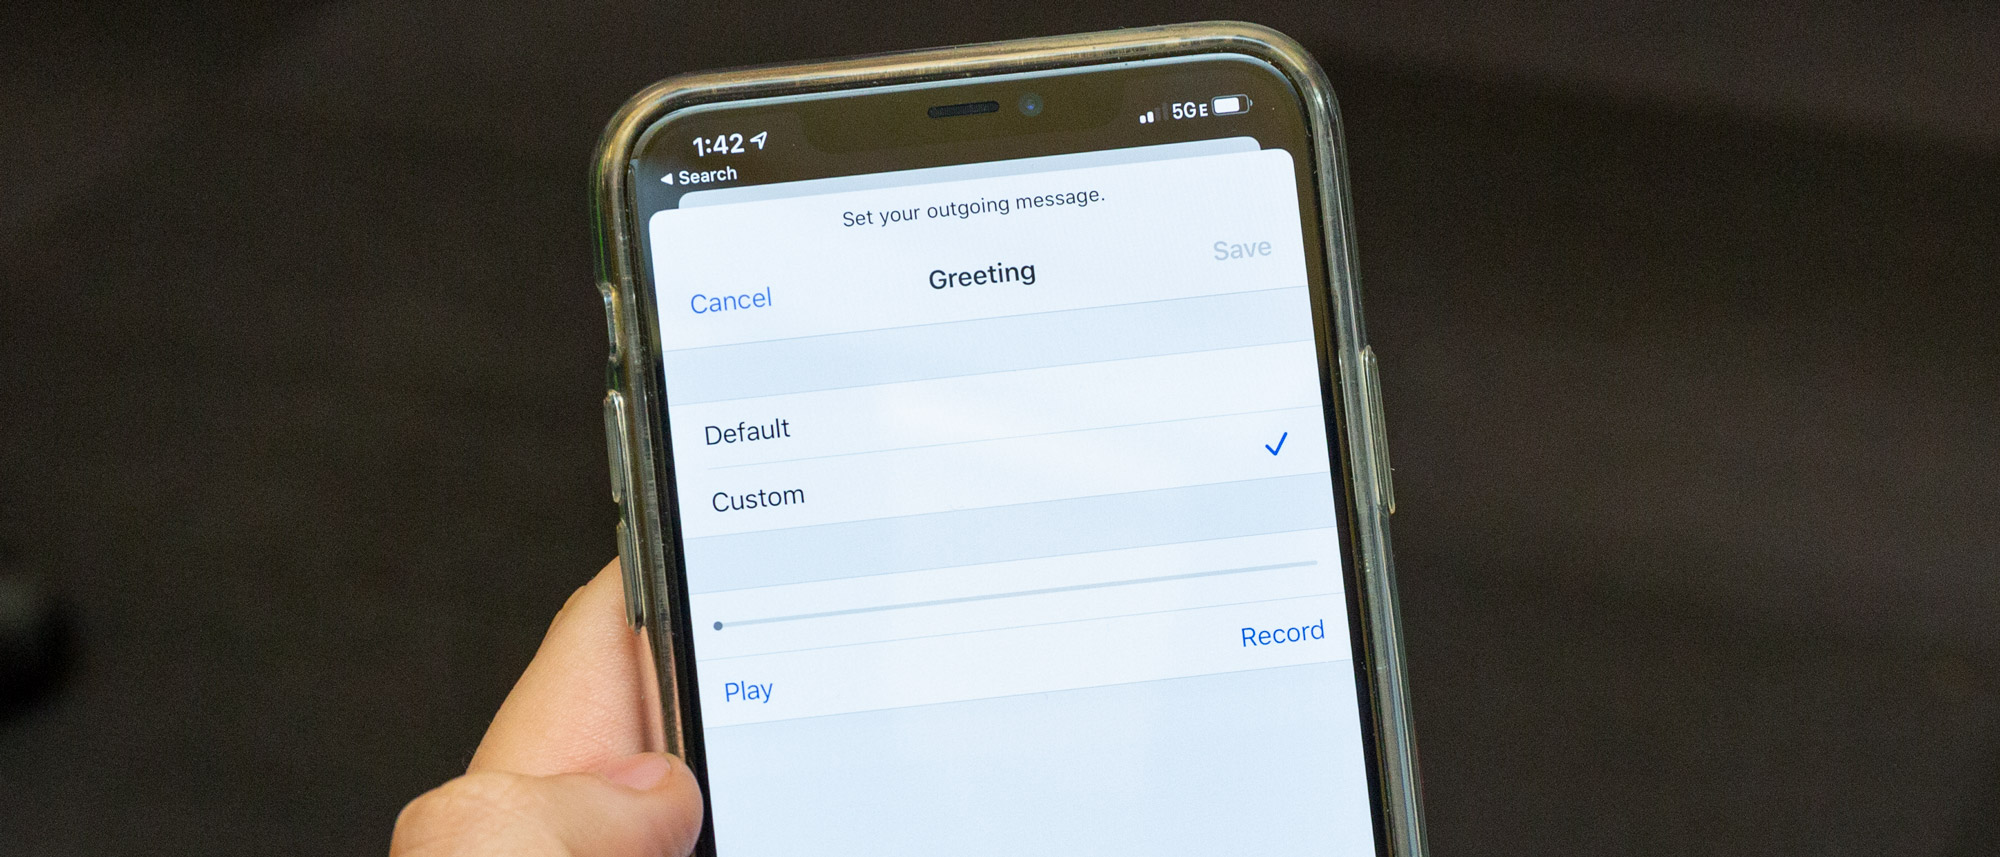 How To Set Up Voicemail on iPhone (Here’s Everything You Need to Know)